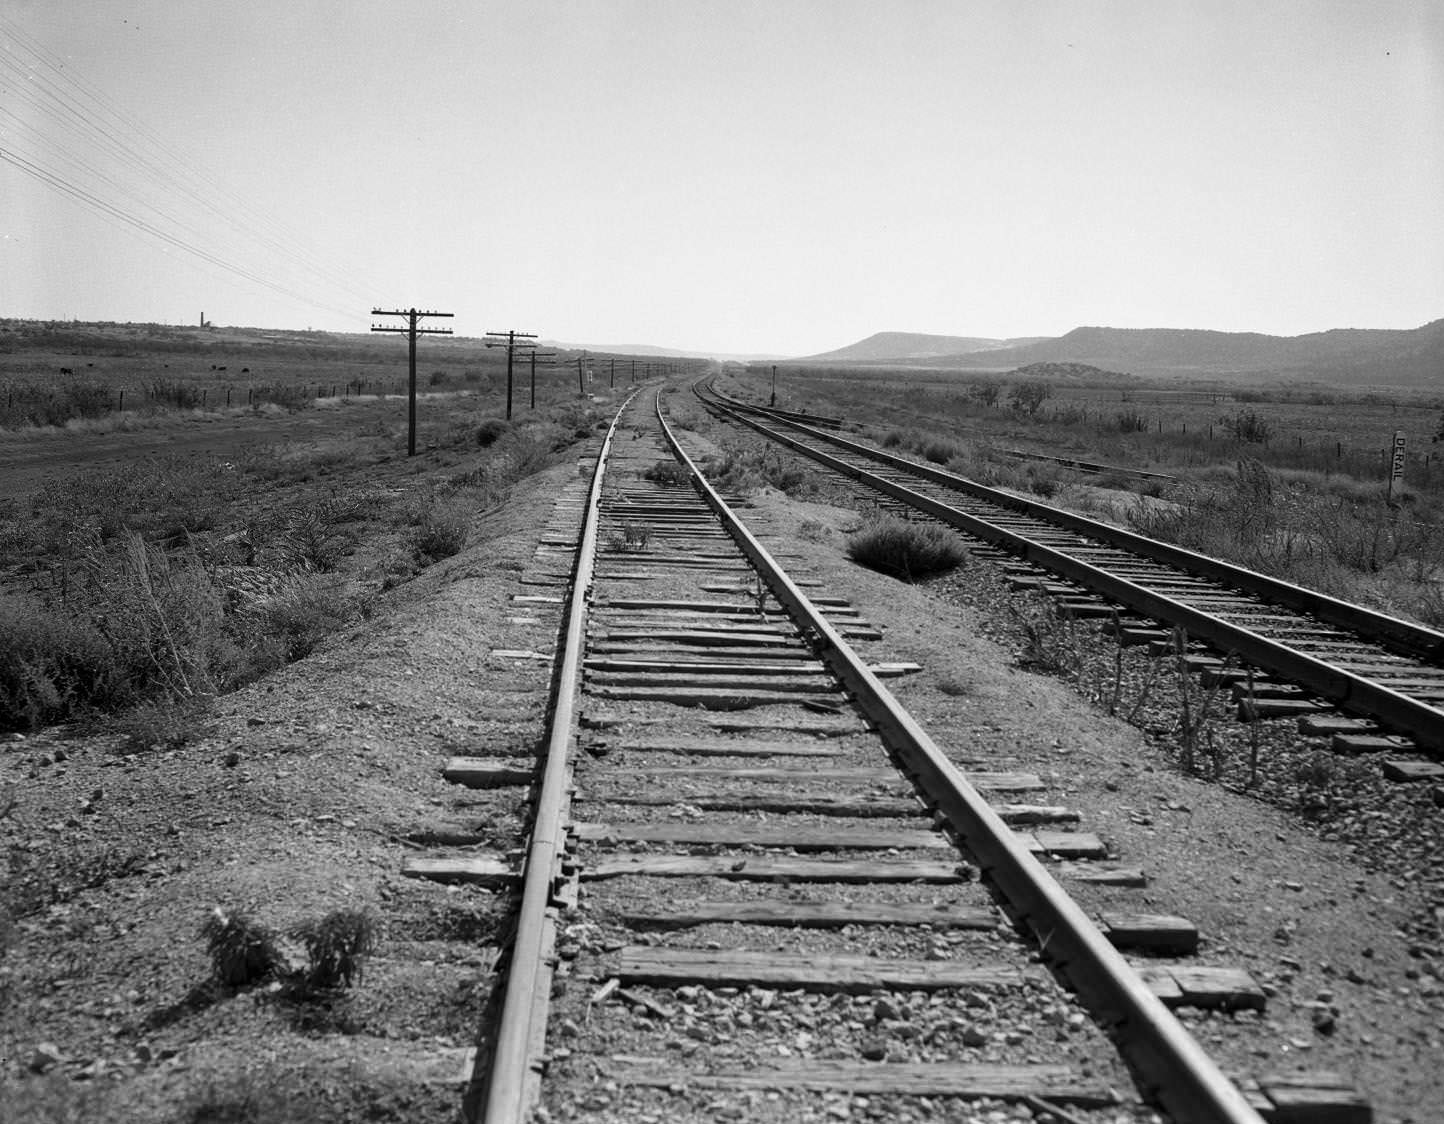 Two sets of train tracks in the desert, 1955